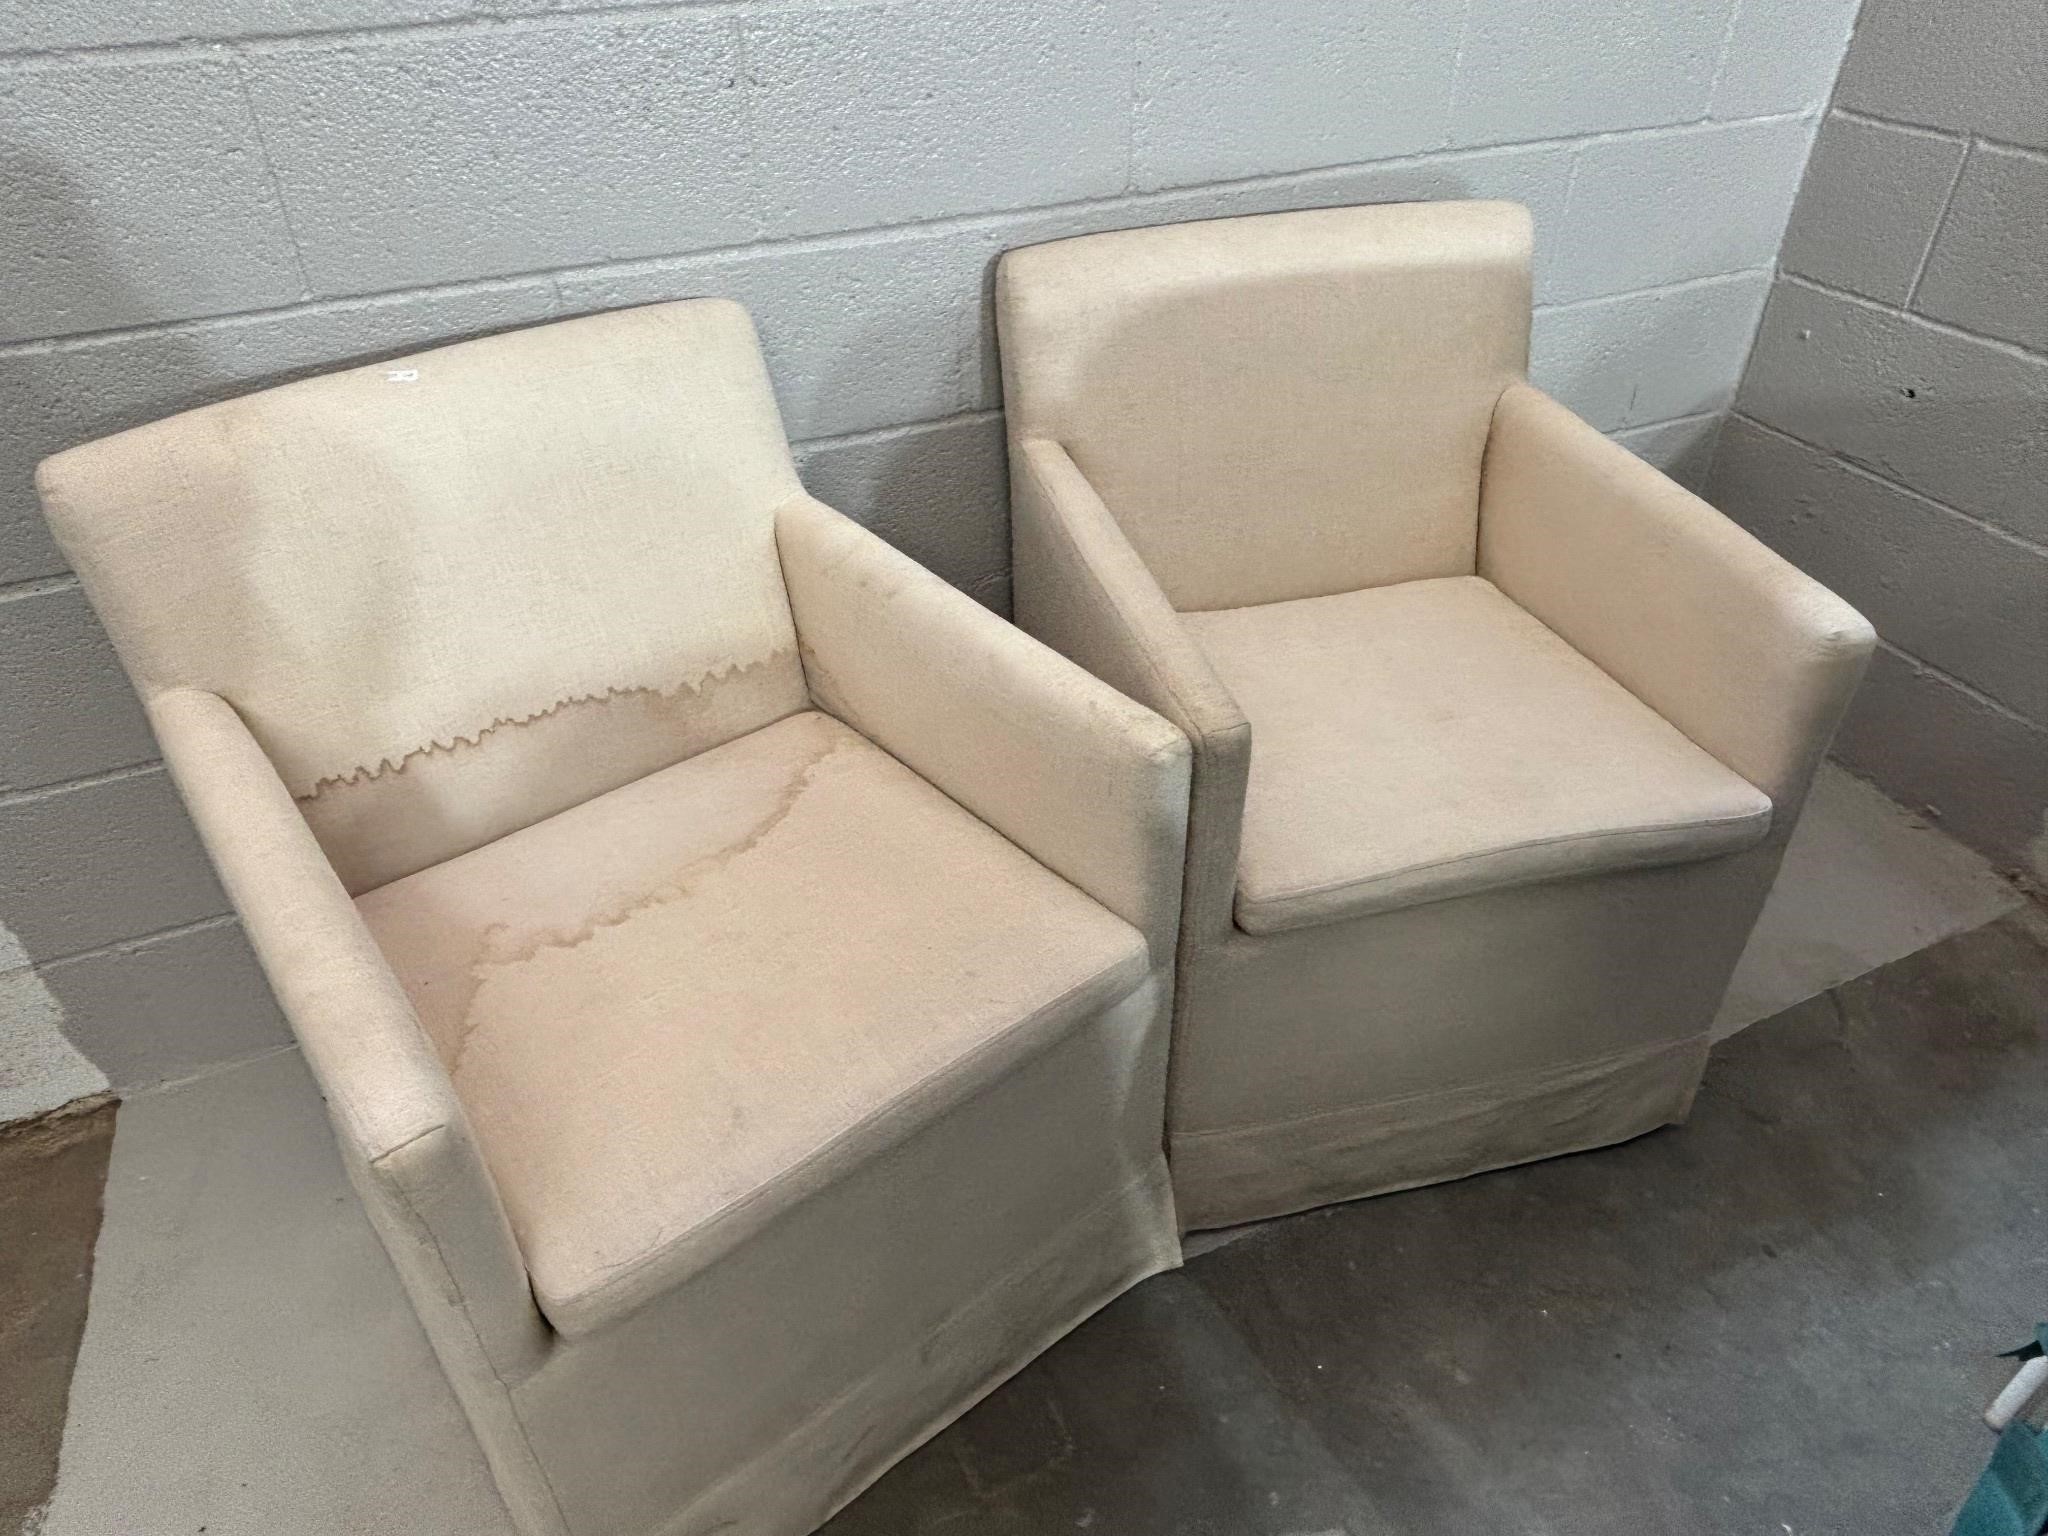 Patio Chairs Qty 2   32"T x 23"